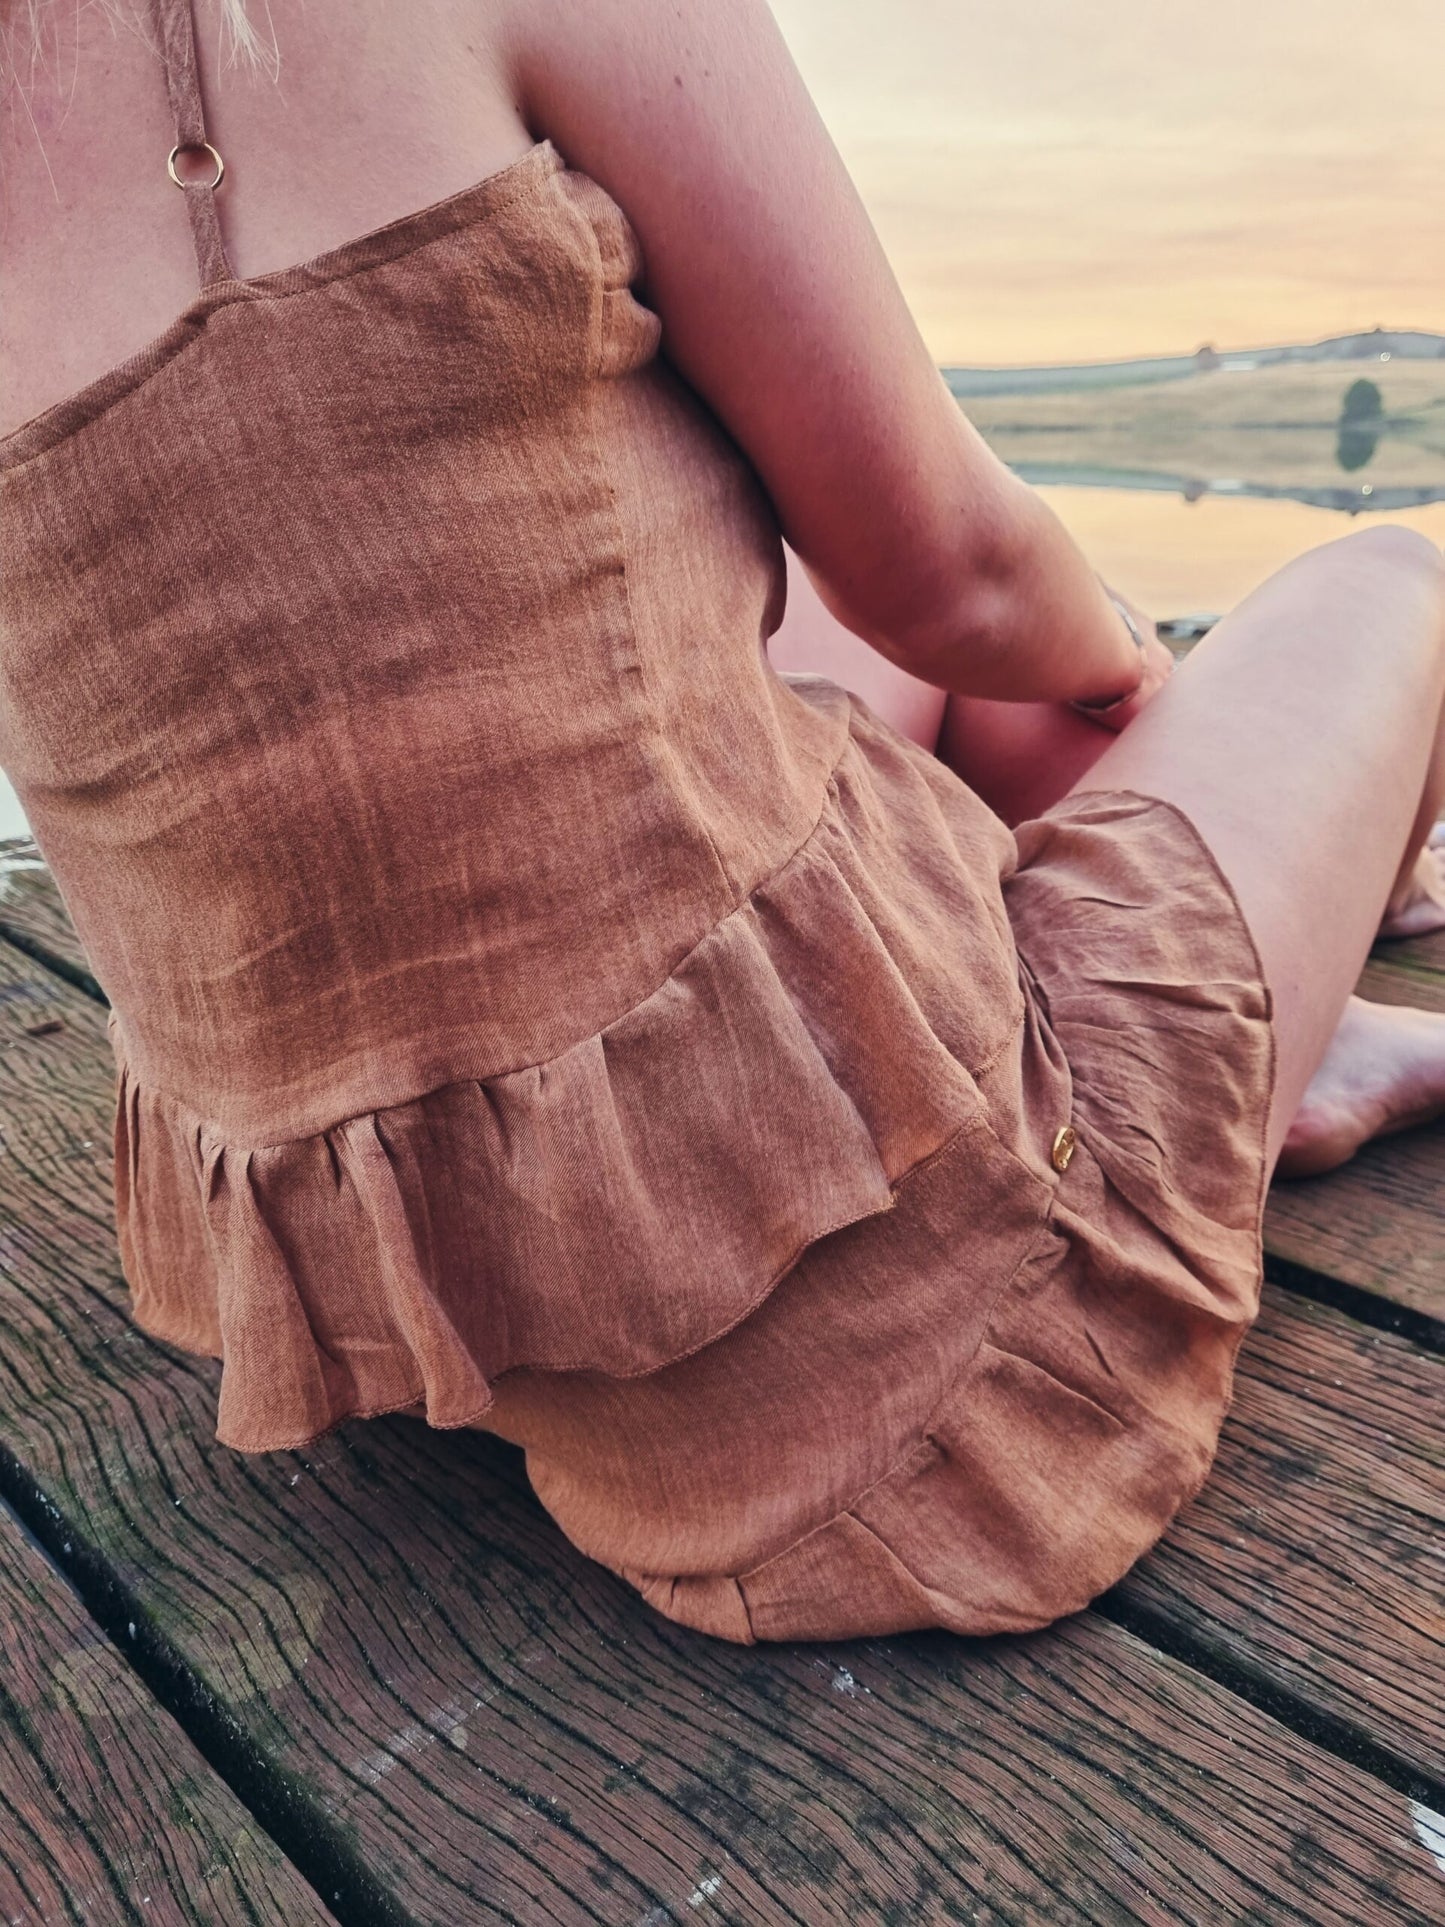 Woman sits on wooden deck wearing a rust coloured linen loungewear set that is made up of a linen top and linen short bottoms. Handcrafted from the highest quality linen fabric, the loungewear attire is designed and manufactured by hand in South Africa.